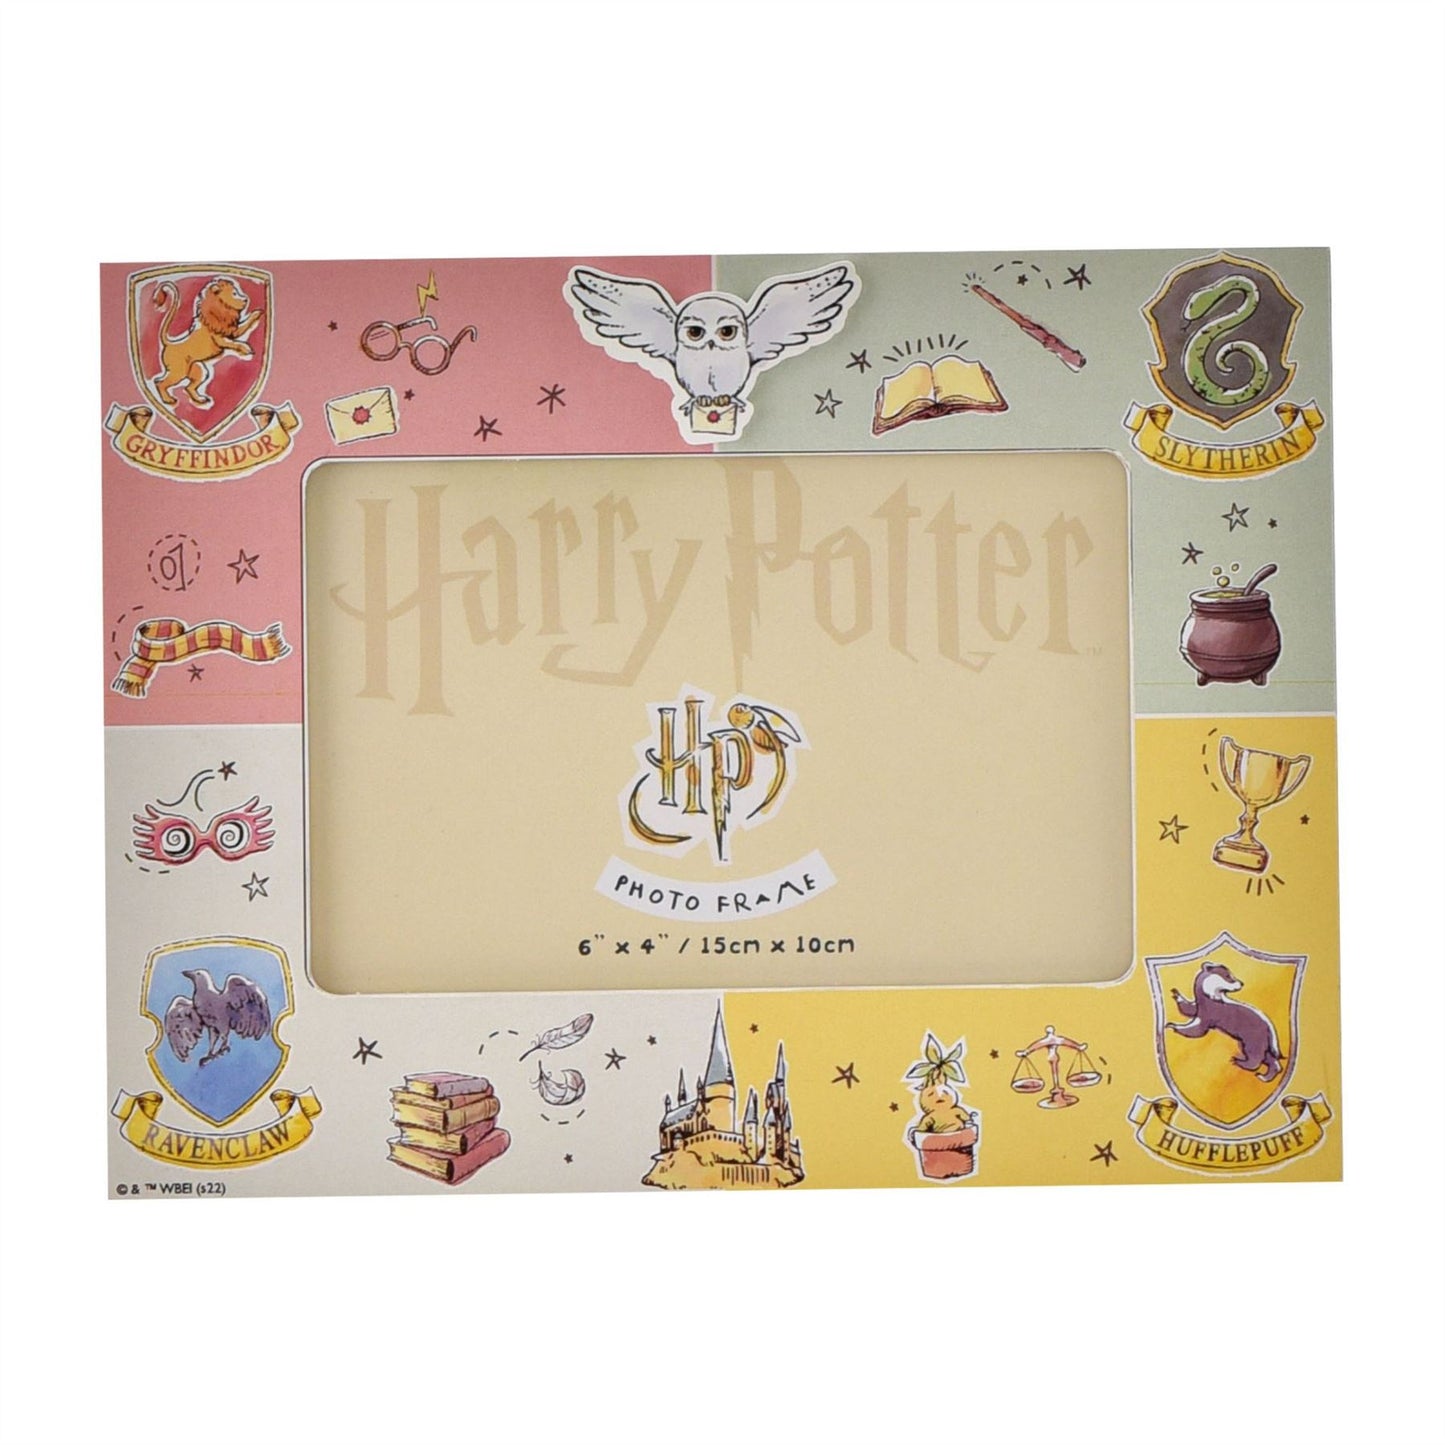 Harry Potter Charms Photo Frame Charms 6" x 4"